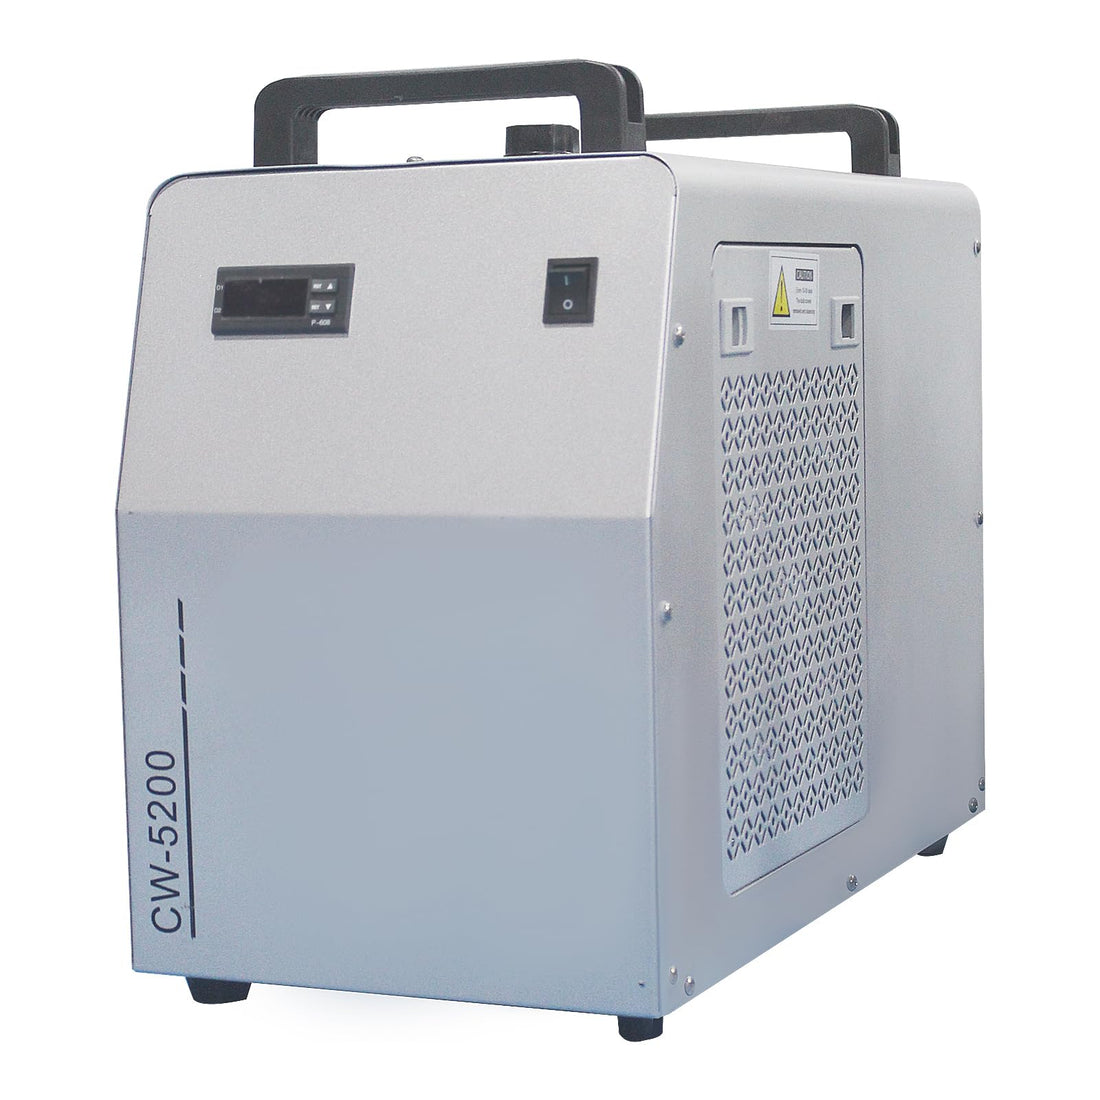 CW-5200 Chiller, 9L, 2.6gpm, 5200 BTU/Hr for CO2 Lasers